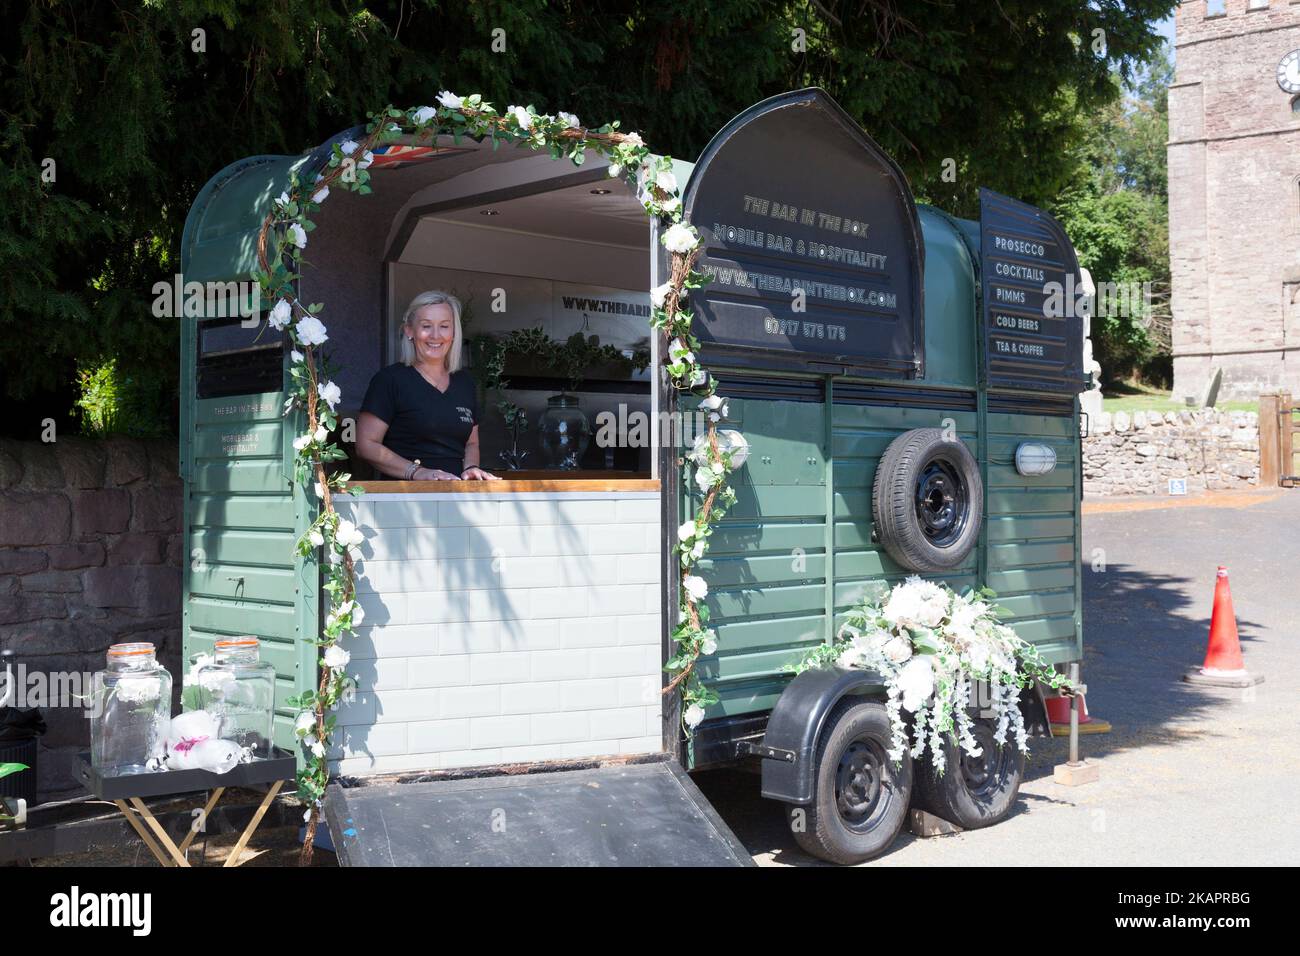 'The Bar in the Box' mobile bar, Dilwyn, Herefordshire, UK Stock Photo